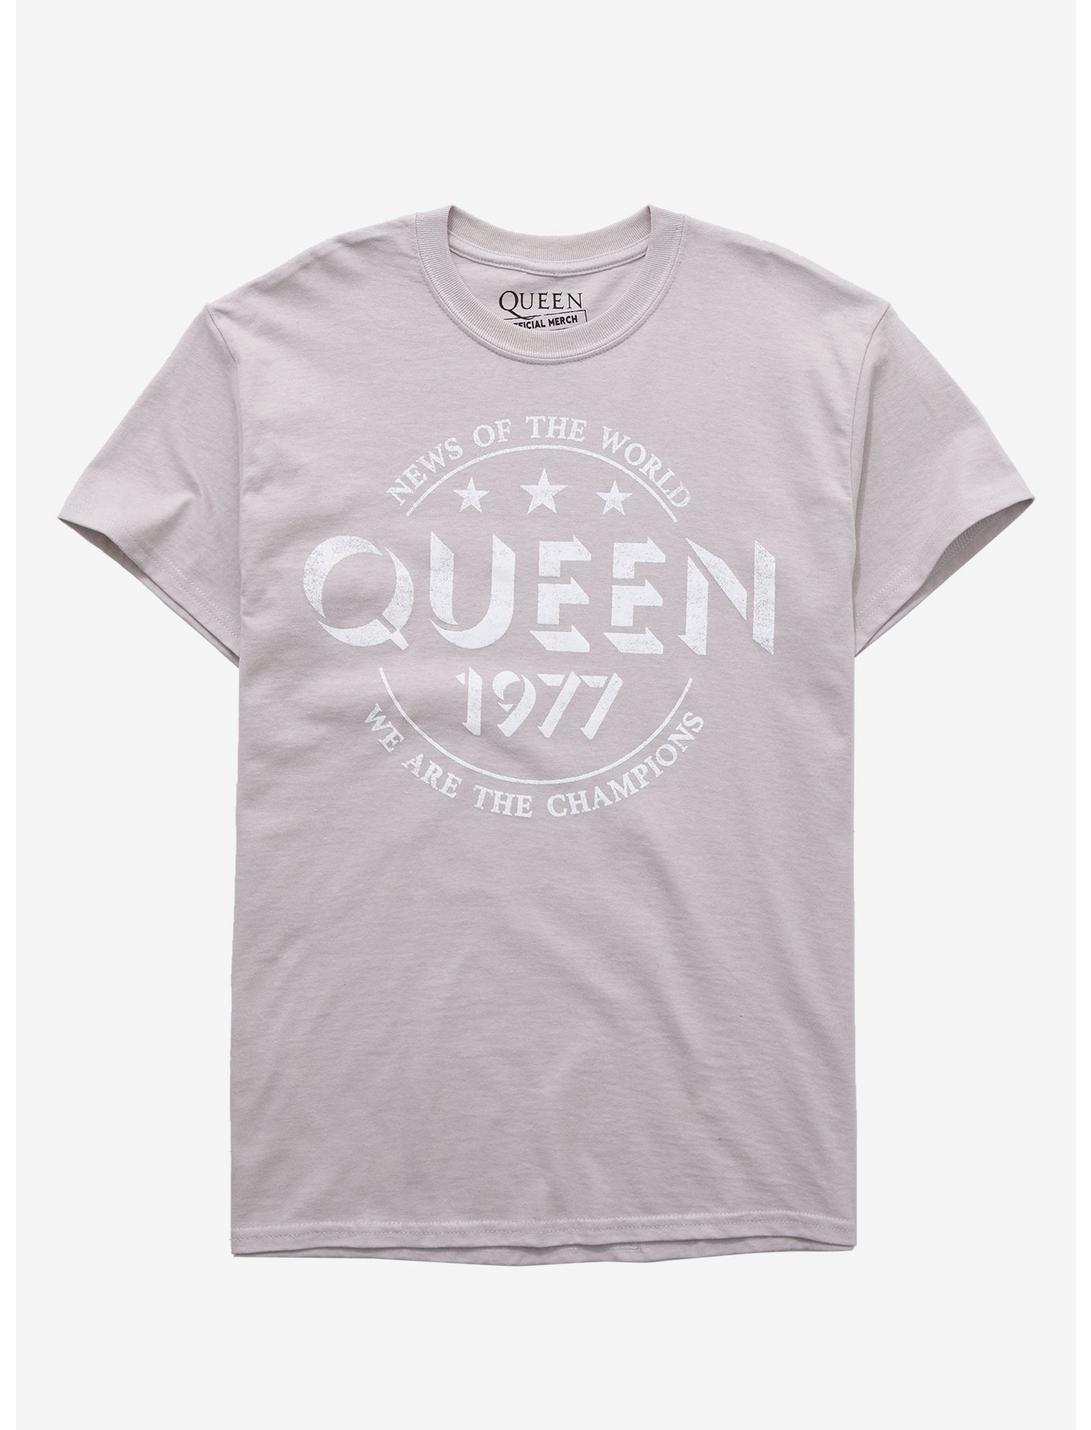 Queen We Are The Champions 1977 Girls T-Shirt, GREY, hi-res